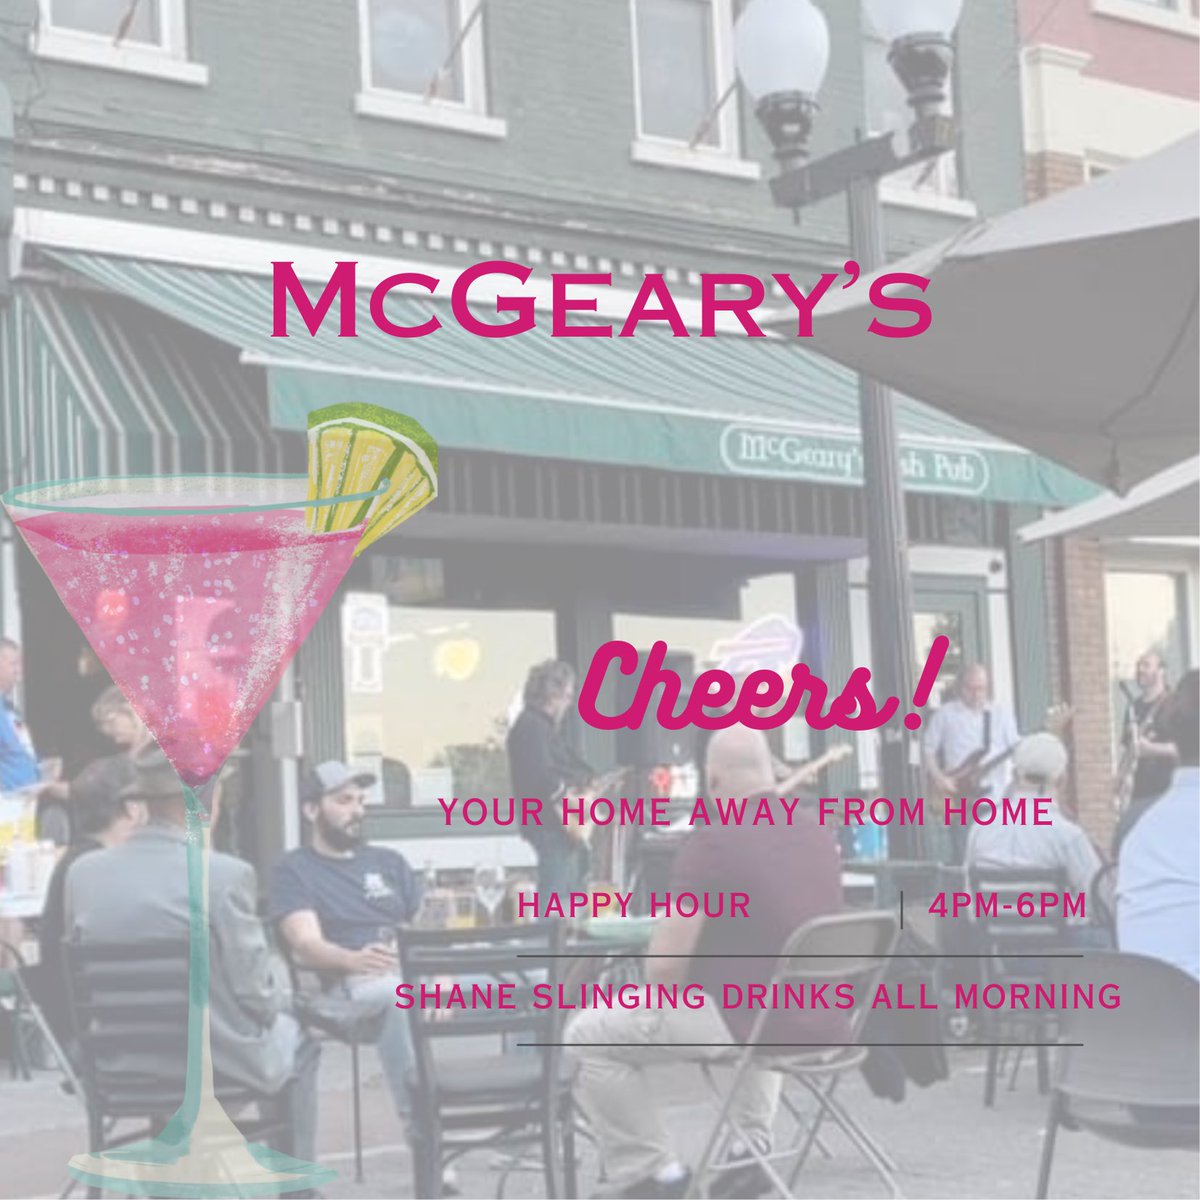 Thirsty Thursday with your favorite man behind the taps; head on over to McGeary’s & hang with Shane for lunch! #McGearys #IrishPub #DowntownAlbany #SupportLocal #ThirstyThursday #HappyHour